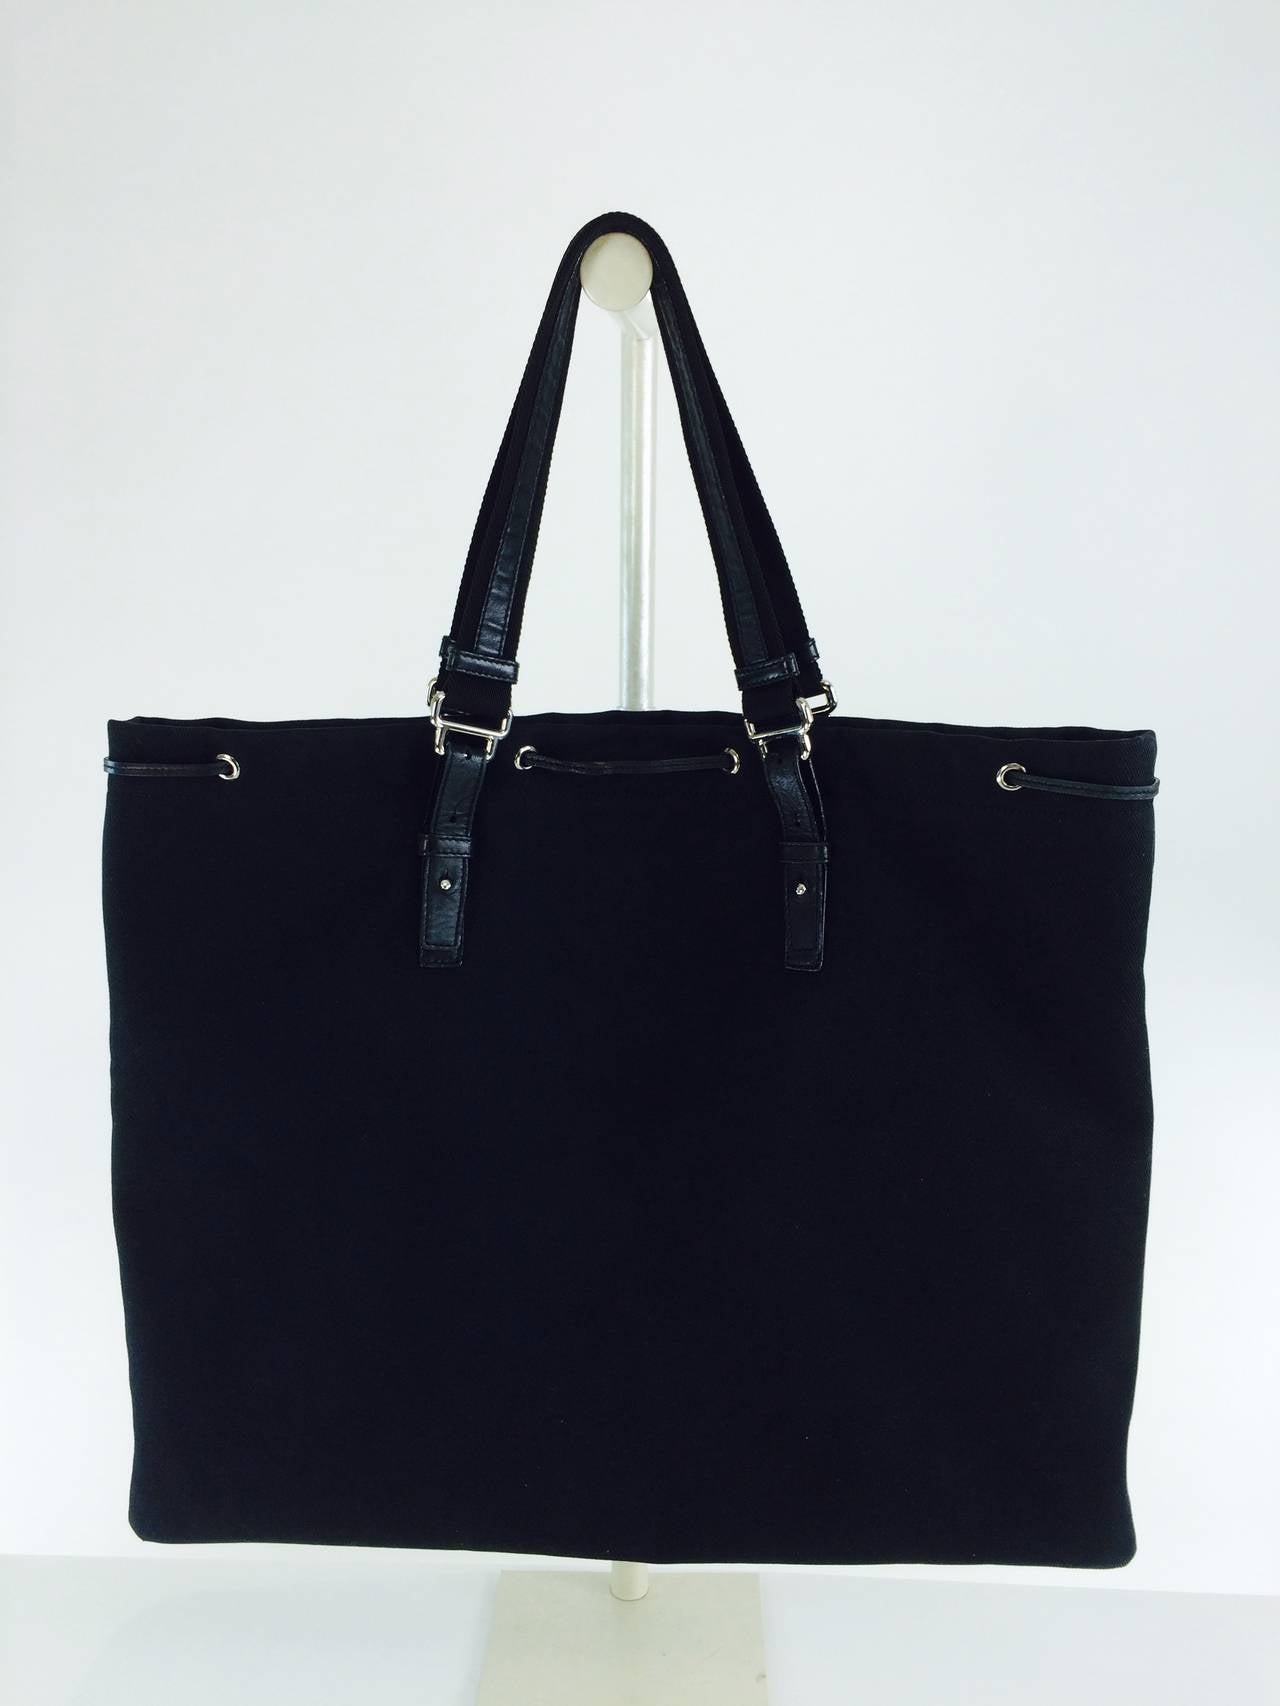 YSL large black canvas tote bag, YSL initals in black velvet appliqued at the front, black leather and black canvas handles (adjustable), silver hardware with black leather drawstring at the top...The bag is lined in black satin and has a single